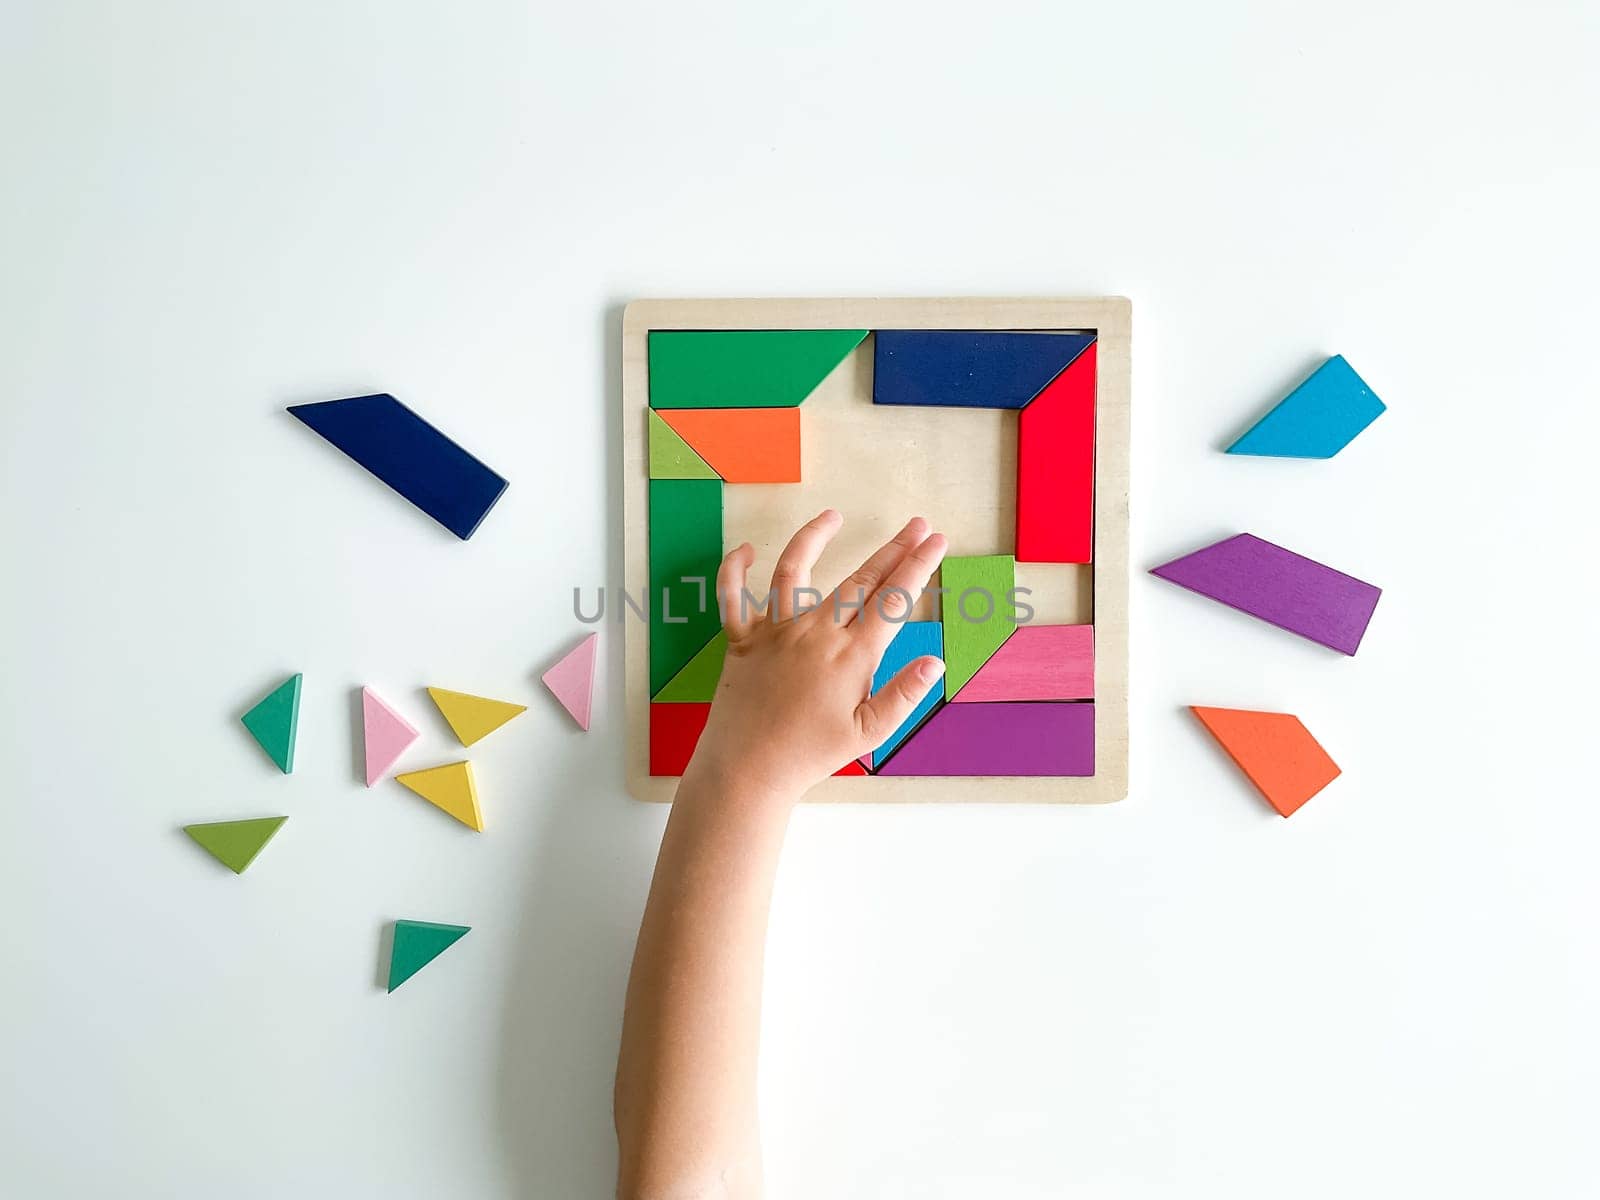 childs hand collects multicolored wooden mosaic on white background. child solves a colorful tangram. square of colorful geometric shapes on white background.